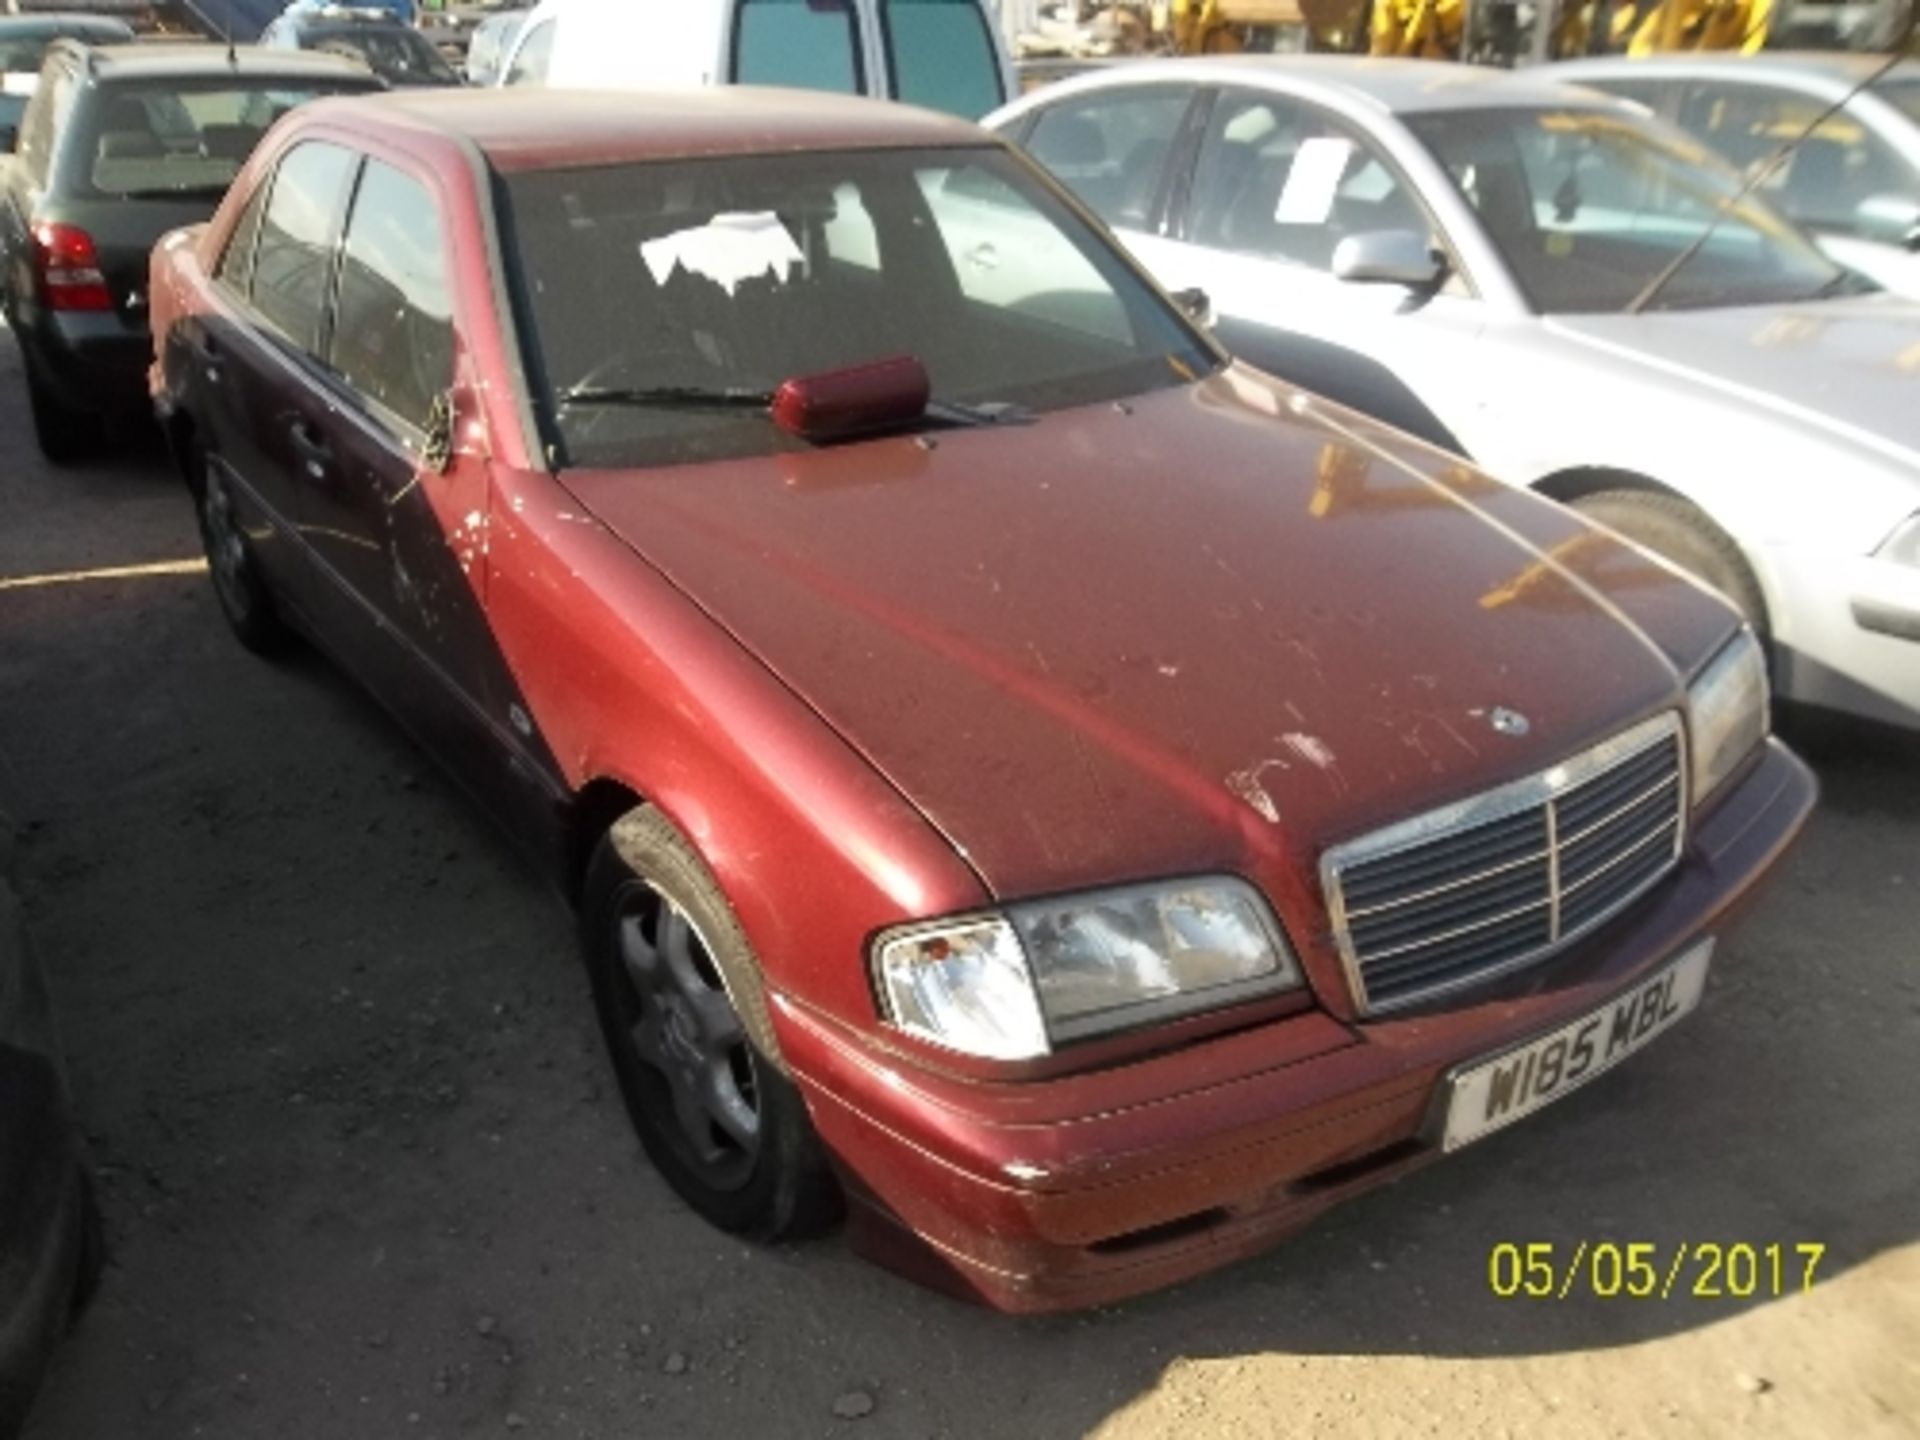 Mercedes C200 Sport - W185 MBL Date of registration: 01.03.2000 1998cc, petrol, 5 speed automatic, - Image 3 of 5